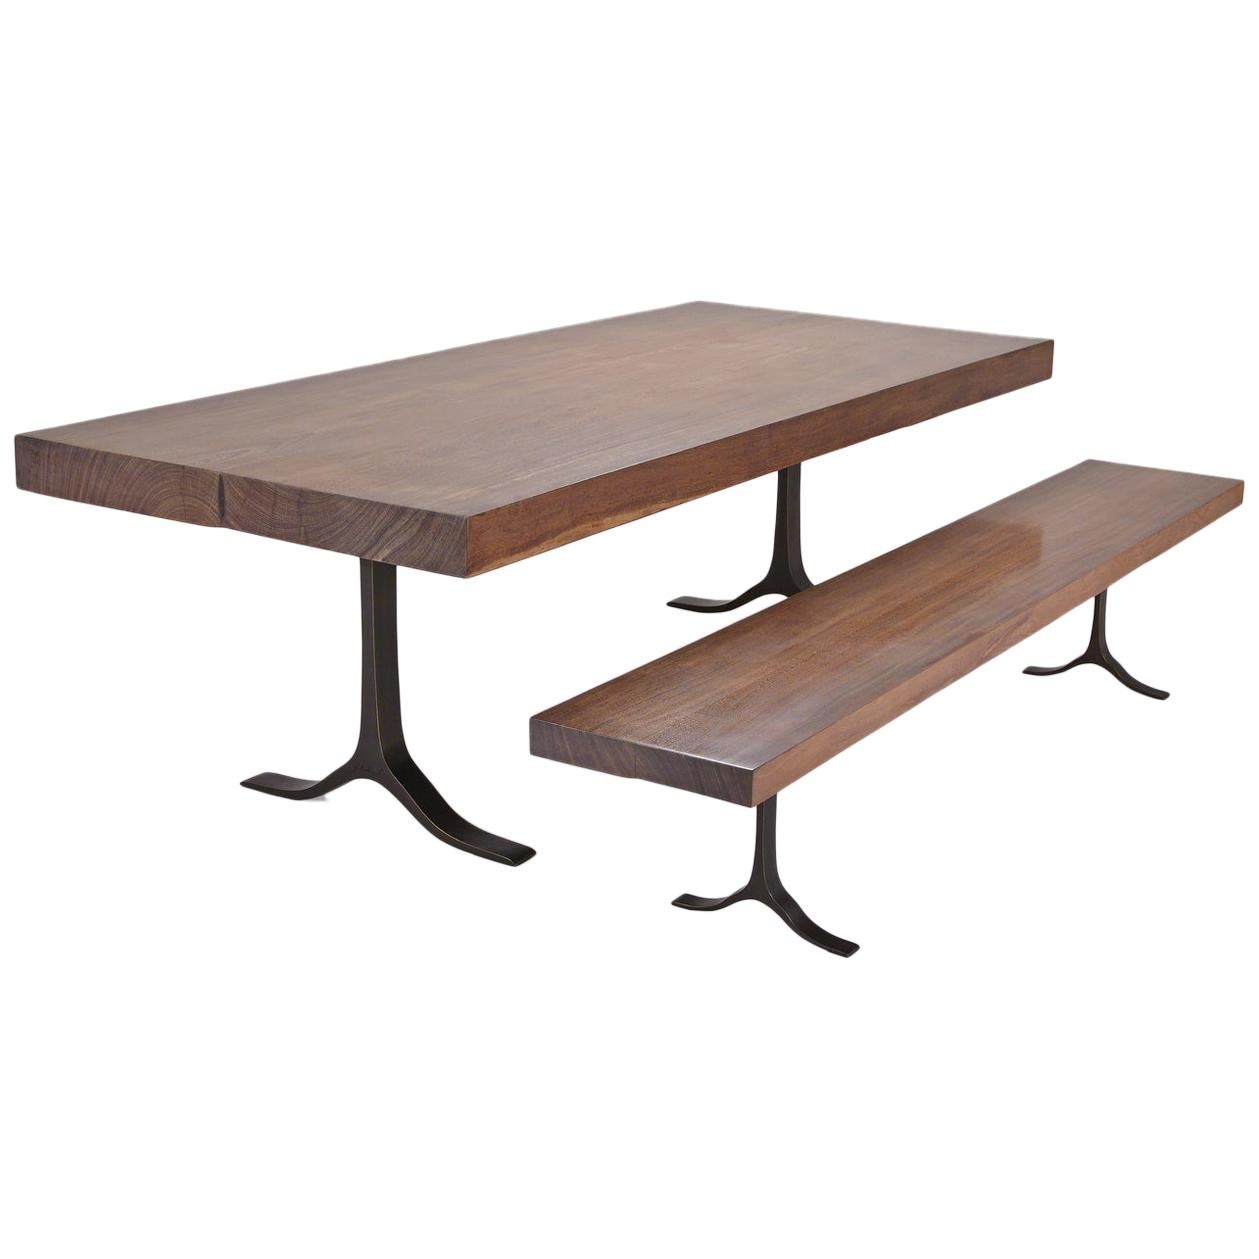 Set of Bespoke Two Joint Slabs Antique Reclaimed Hardwood, Dining Table & Bench For Sale